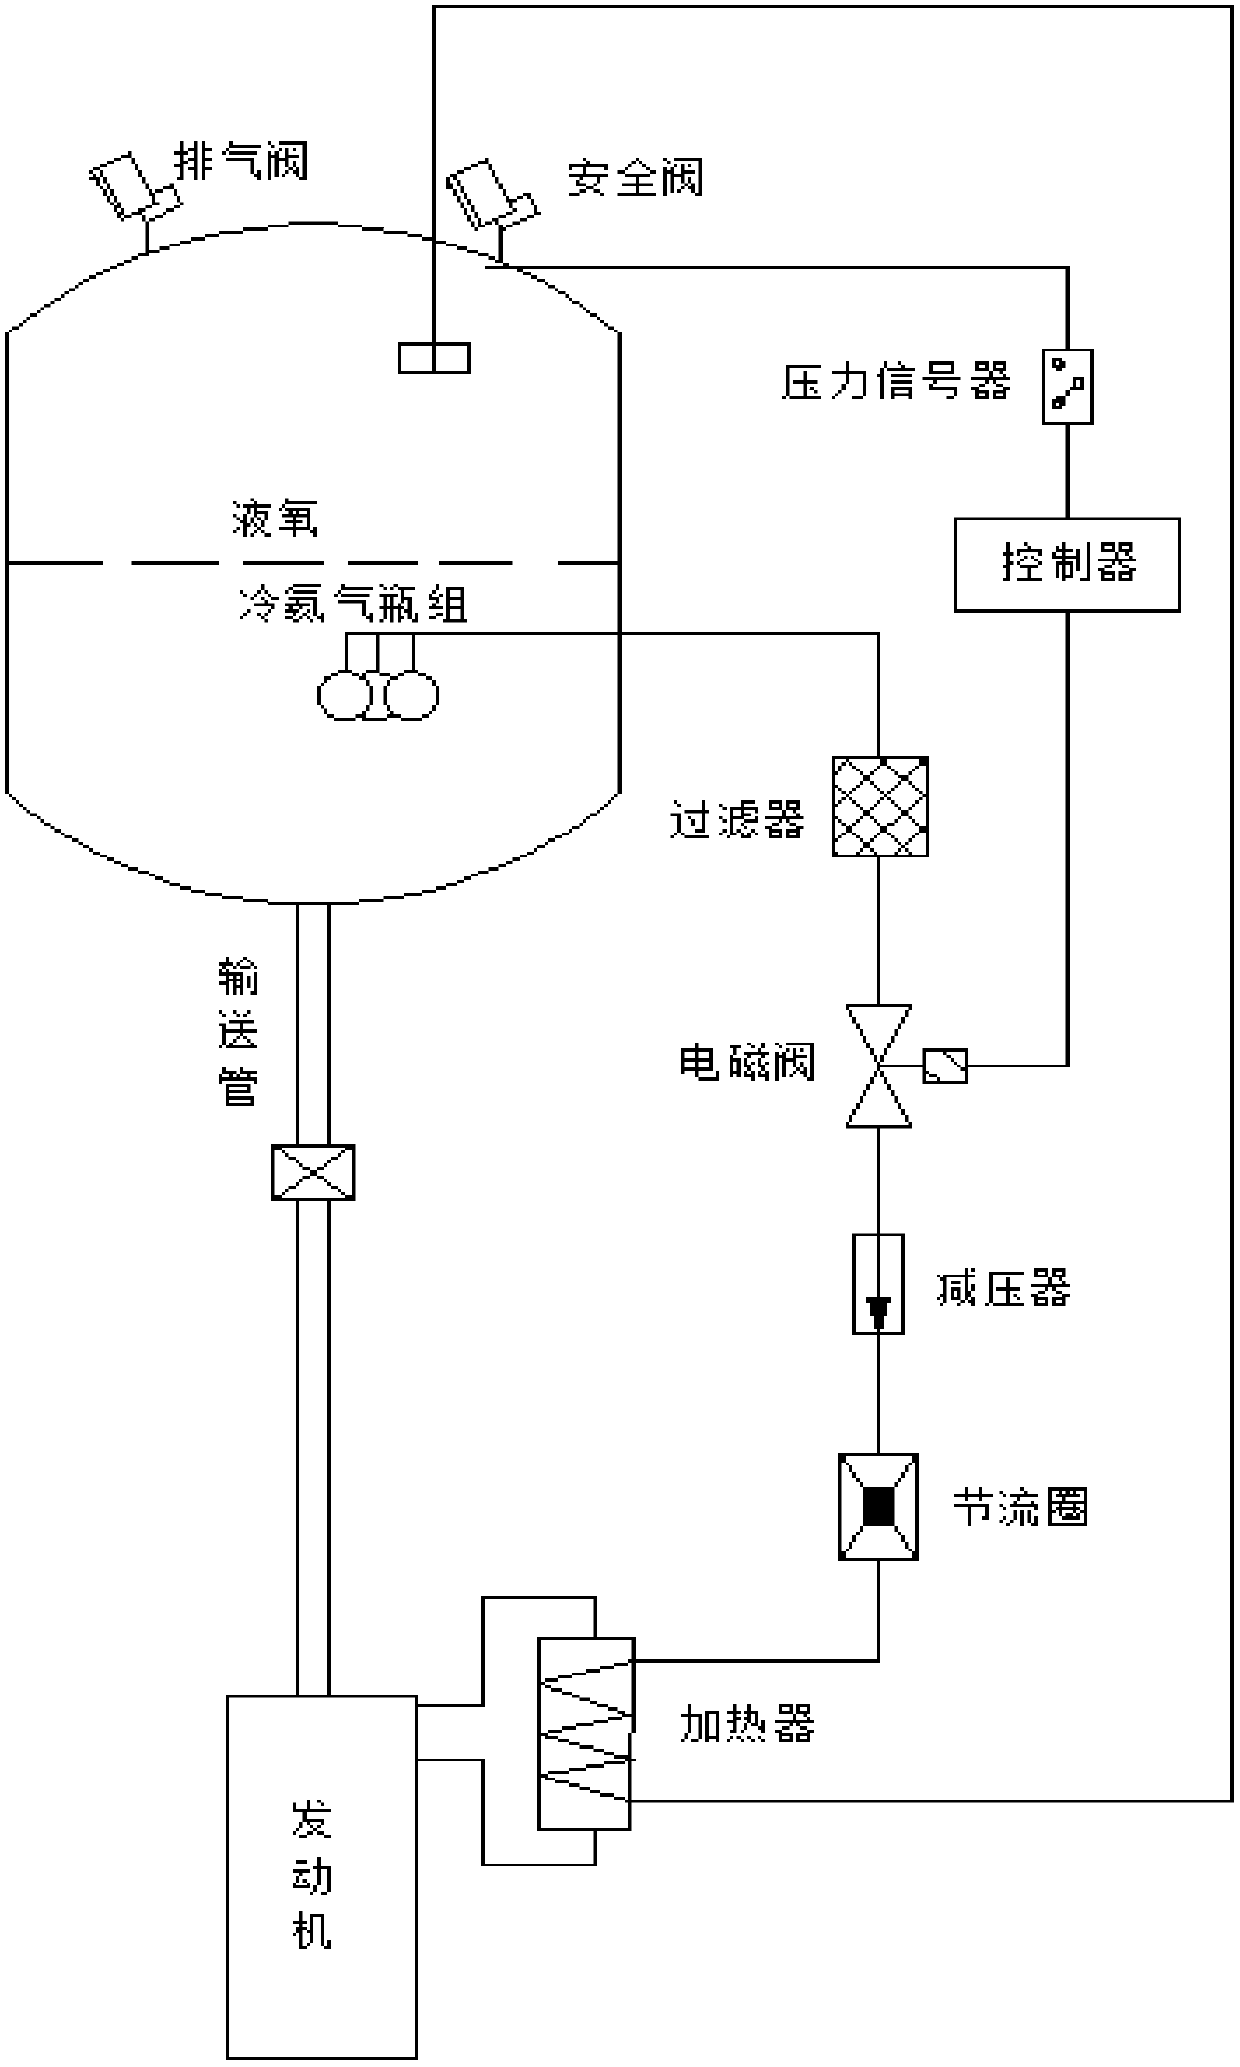 Cold helium heating and pressurizing system for rocket oxygen tank